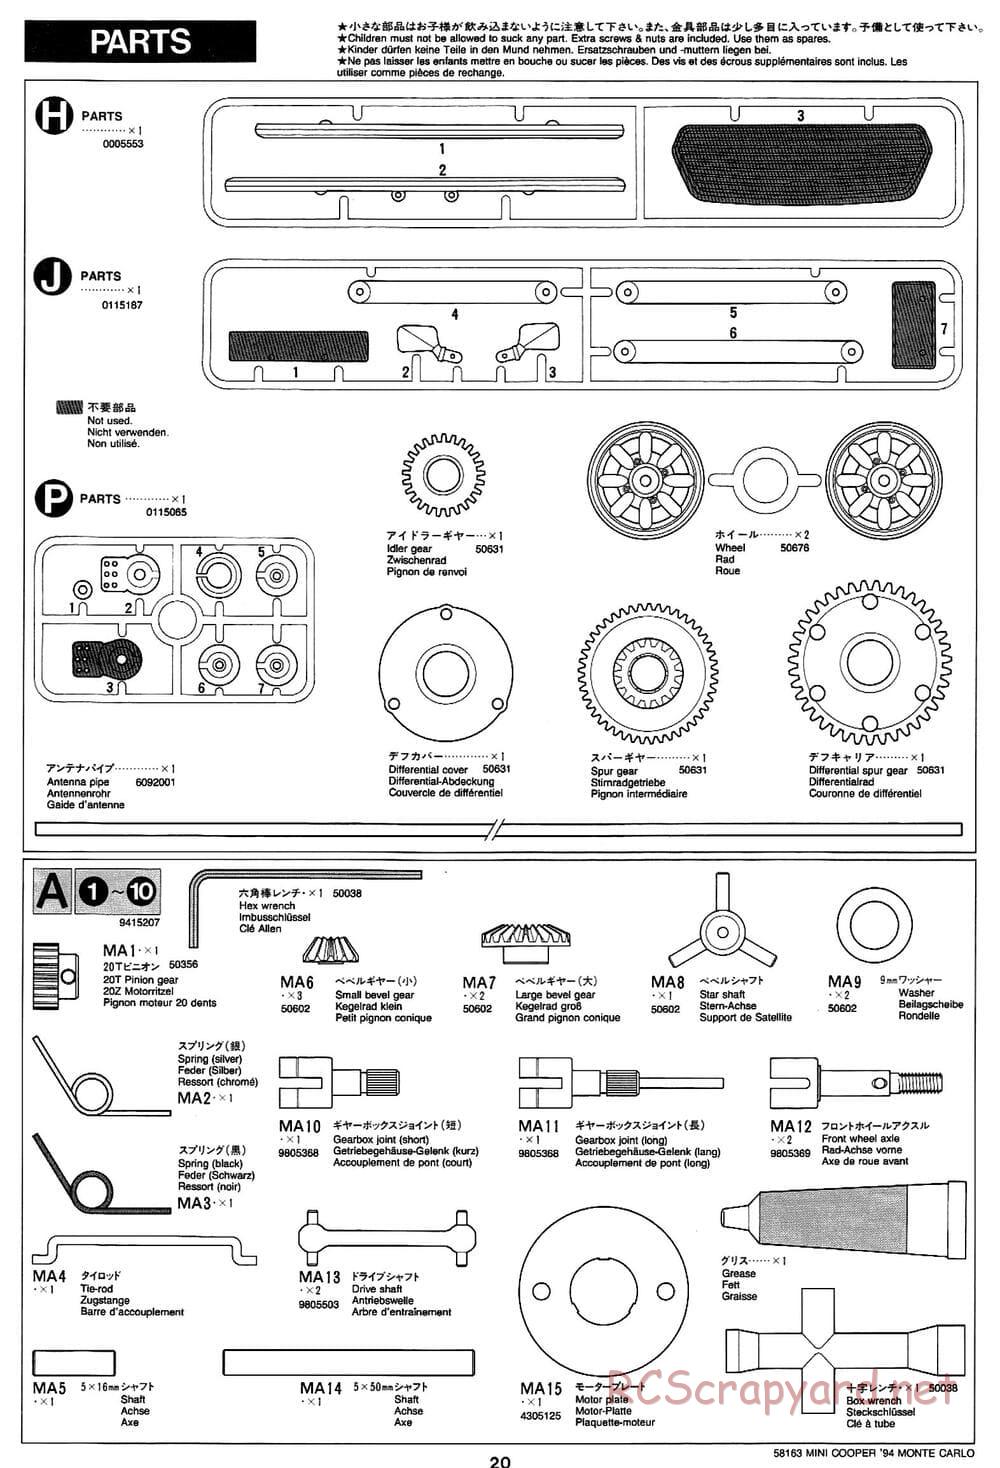 Tamiya - Rover Mini Cooper 94 Monte-Carlo - M01 Chassis - Manual - Page 20